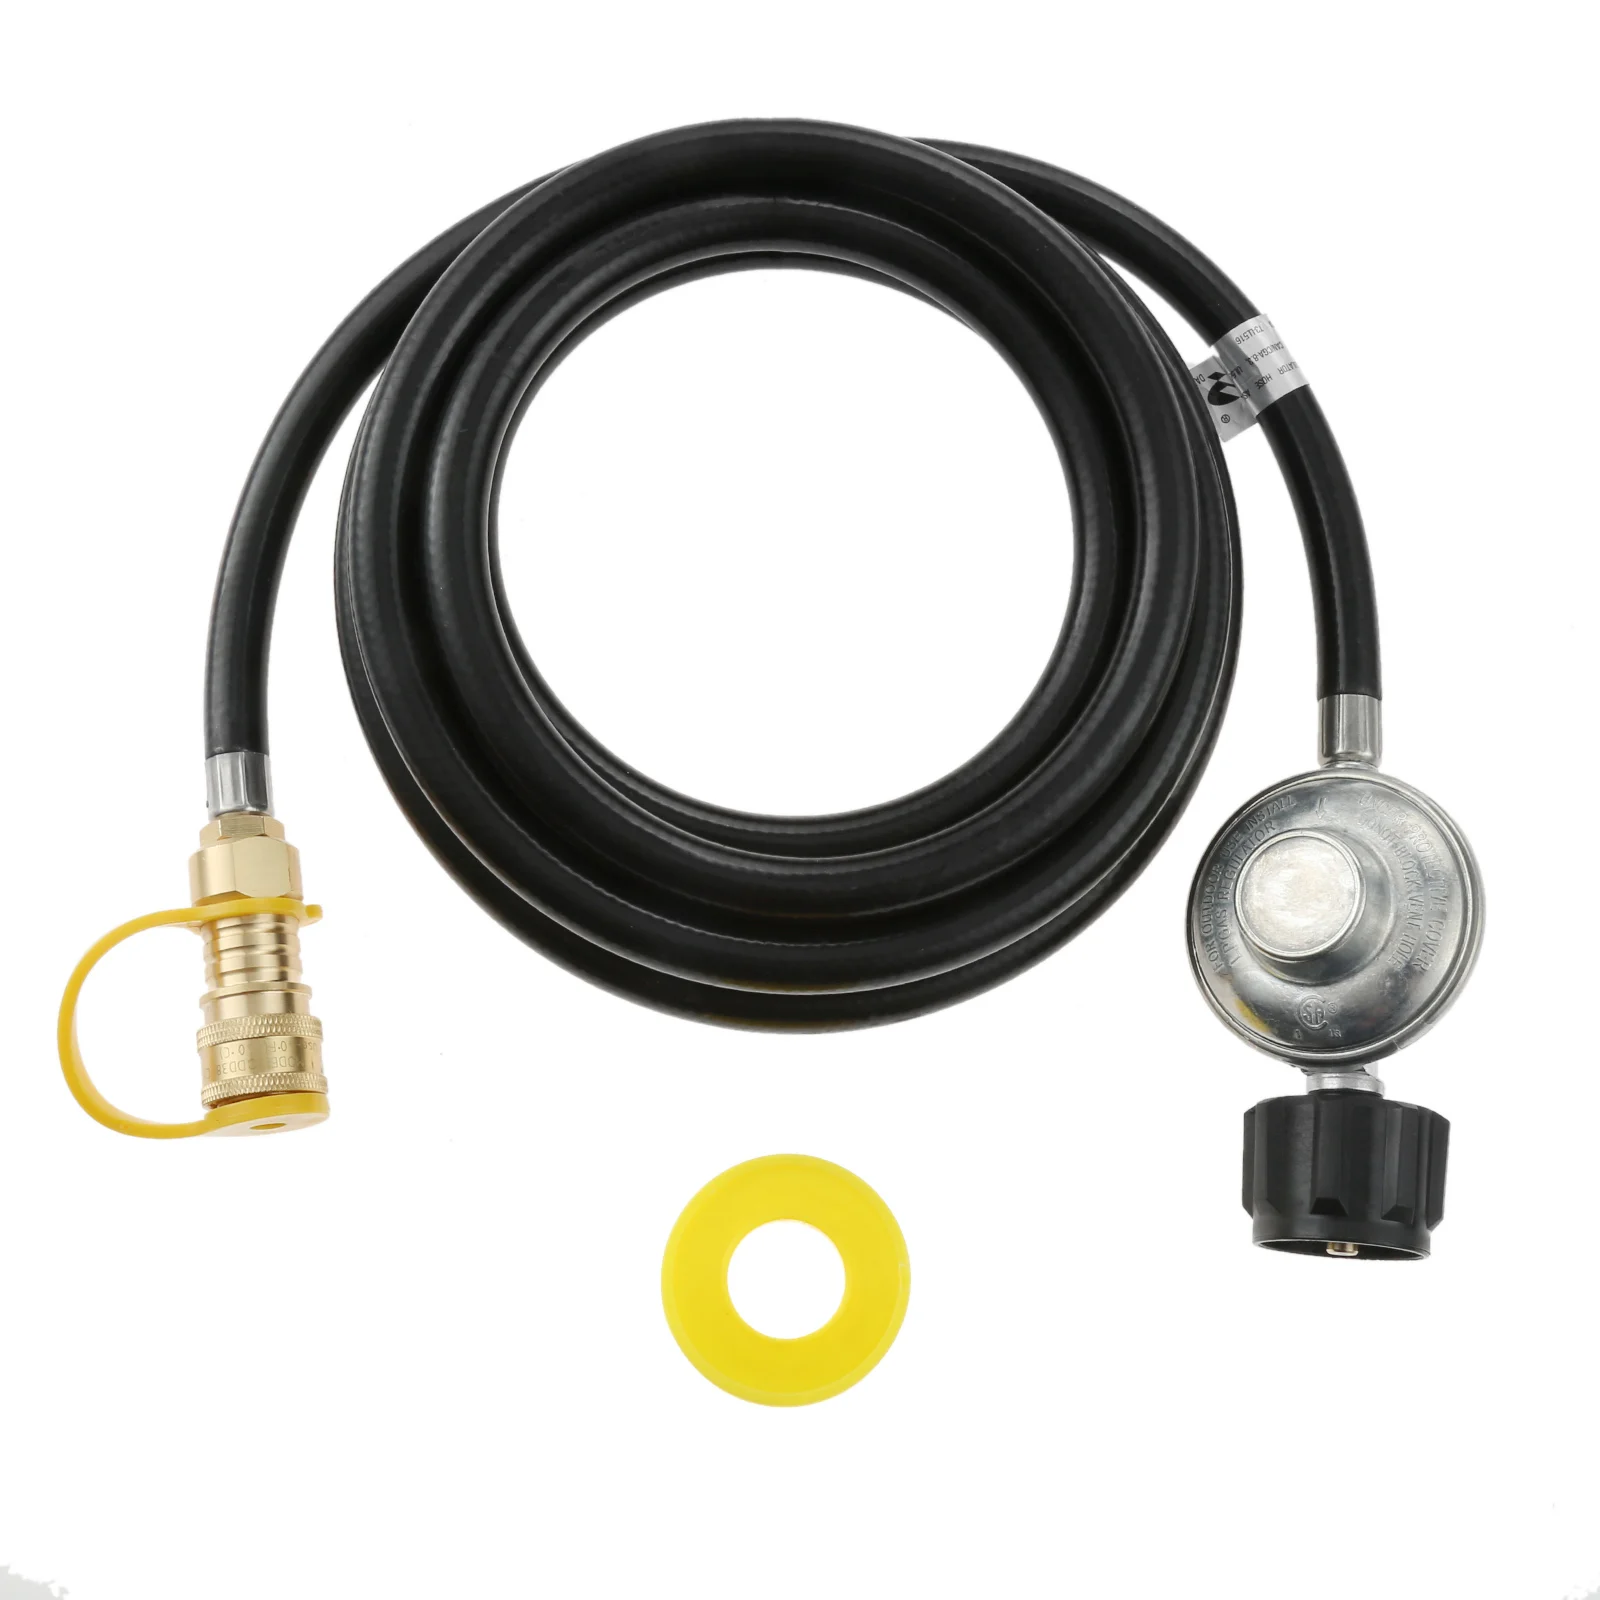 

12 Feet Low Pressure Propane Regulator with 3/8" Quick Plug Disconnect Adapter for Mr Heater Big Buddy BBQ Grill Camp Extension